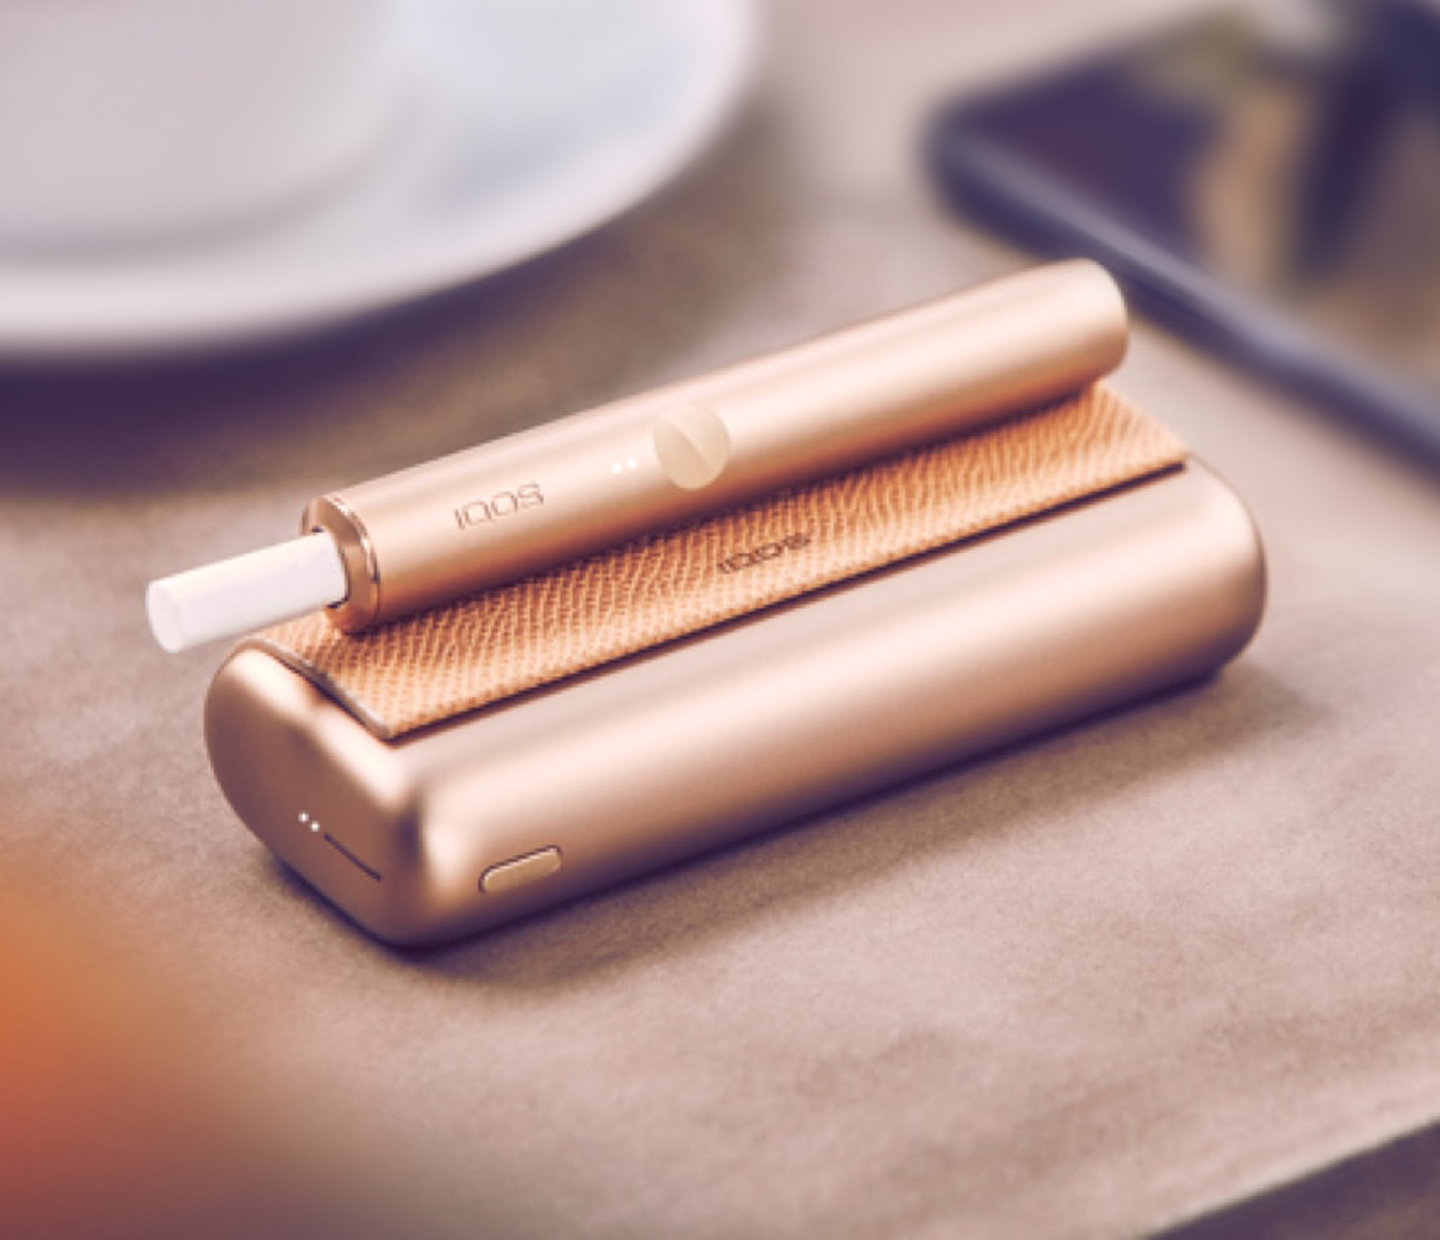 A Gold Khaki IQOS ILUMA PRIME Pocket Charger and Holder on a table.